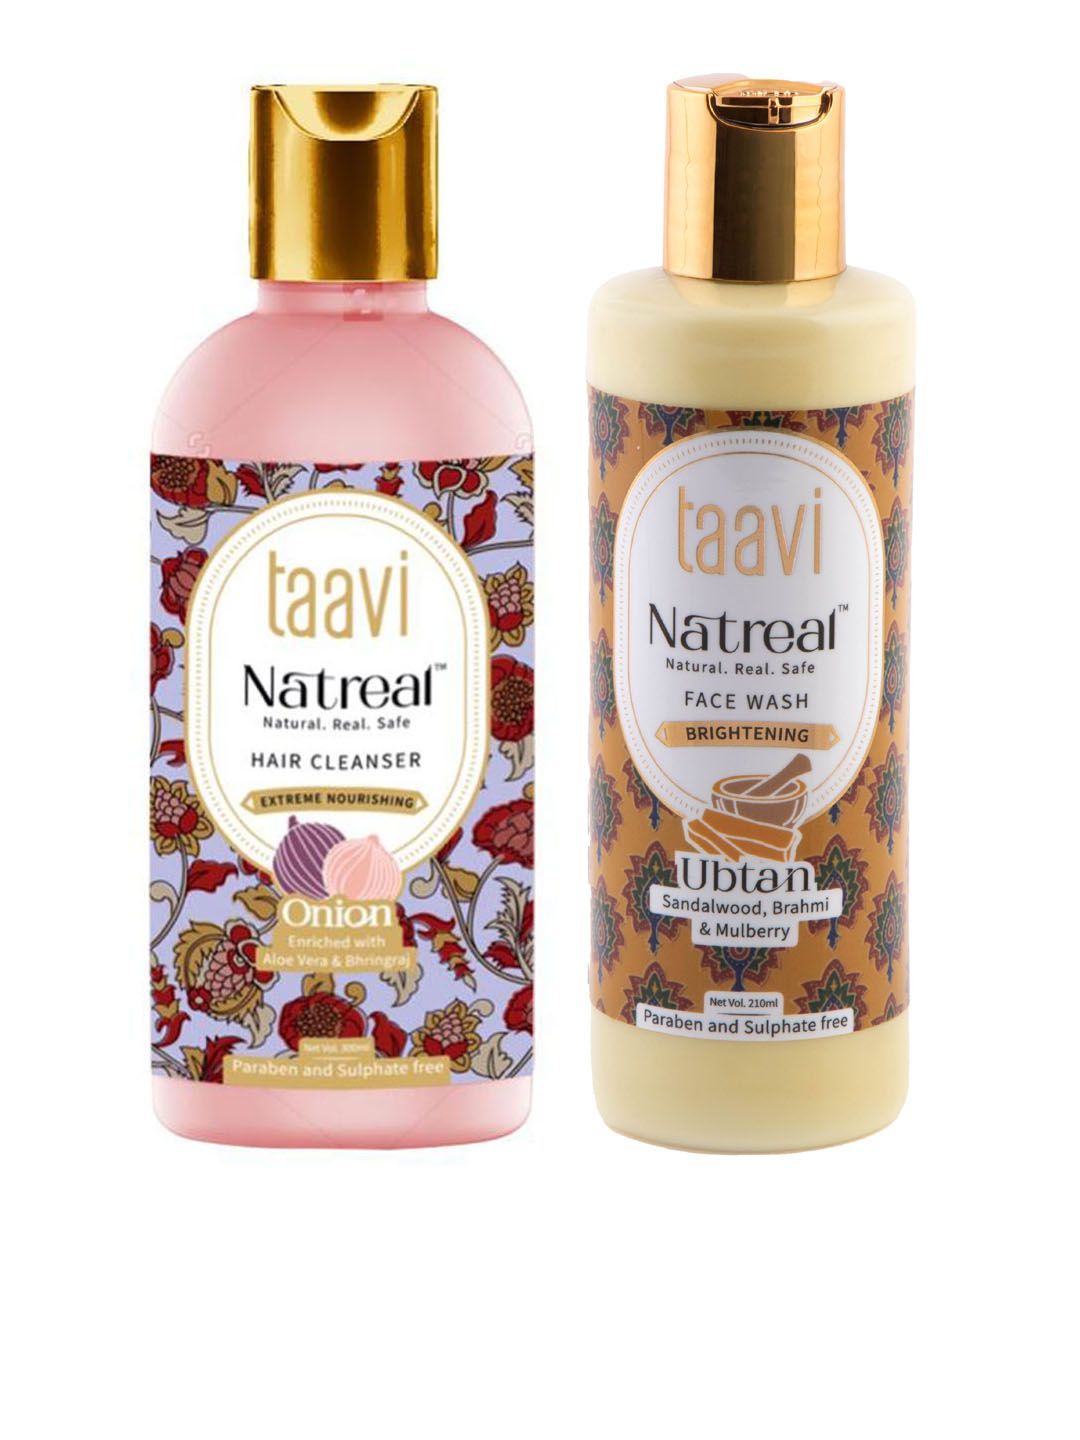 Taavi Set of Natreal Onion Hair Cleanser & Brightening Ubtan Face Wash Price in India